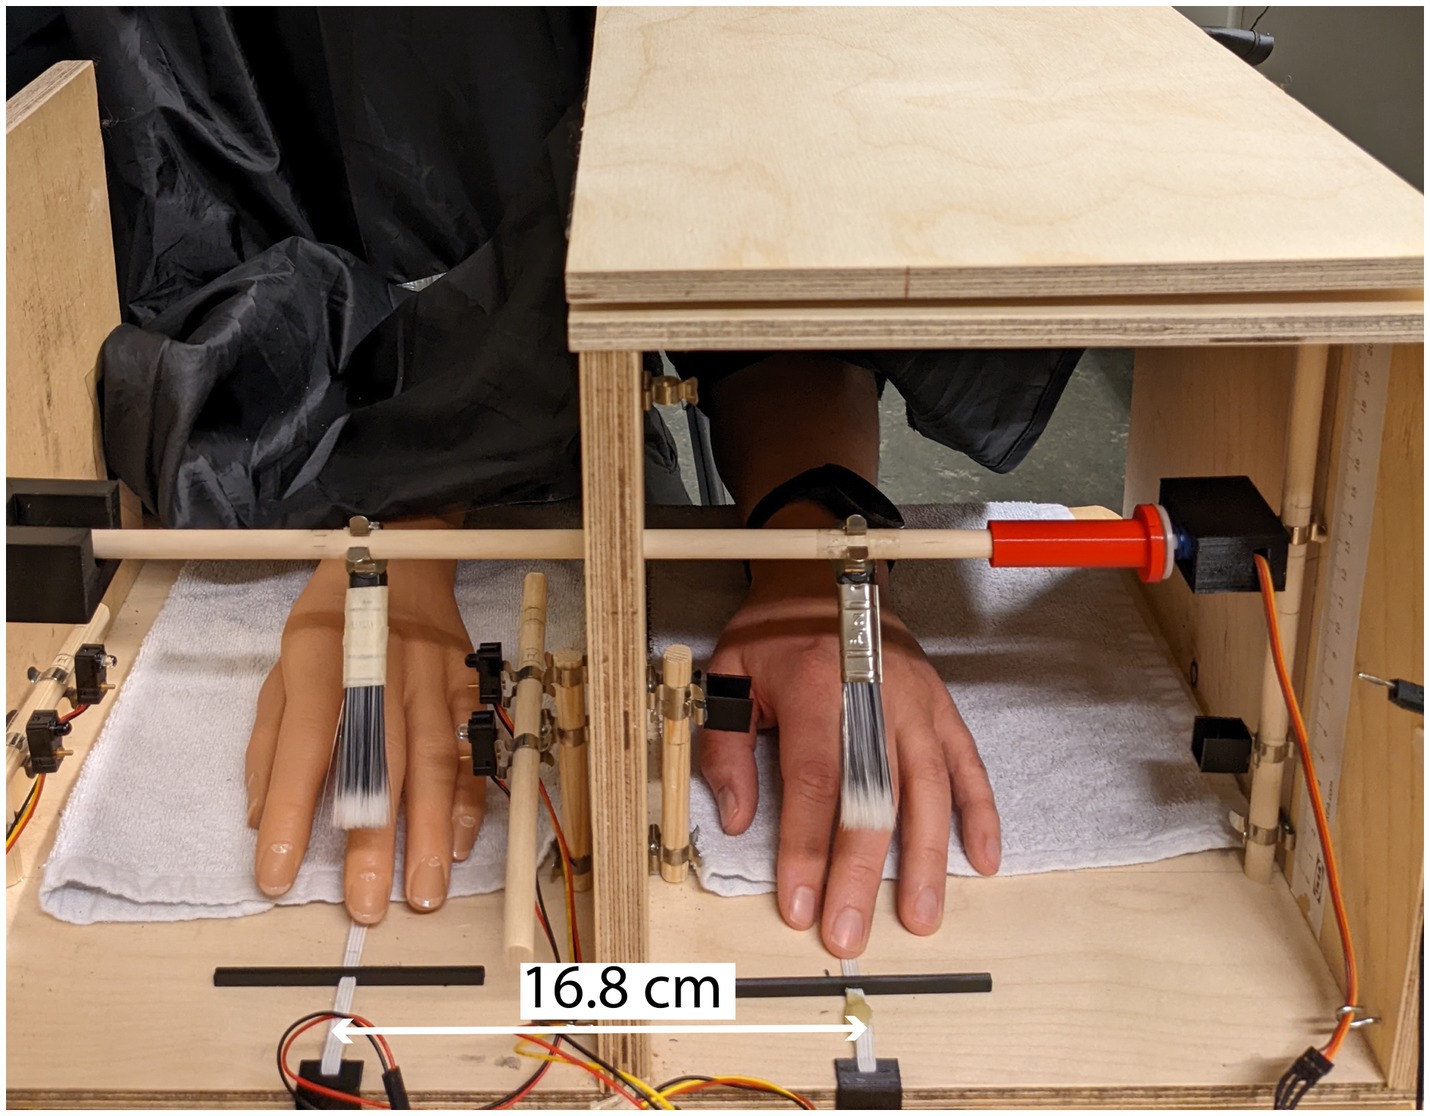 New paper points out flaw in rubber hand illu